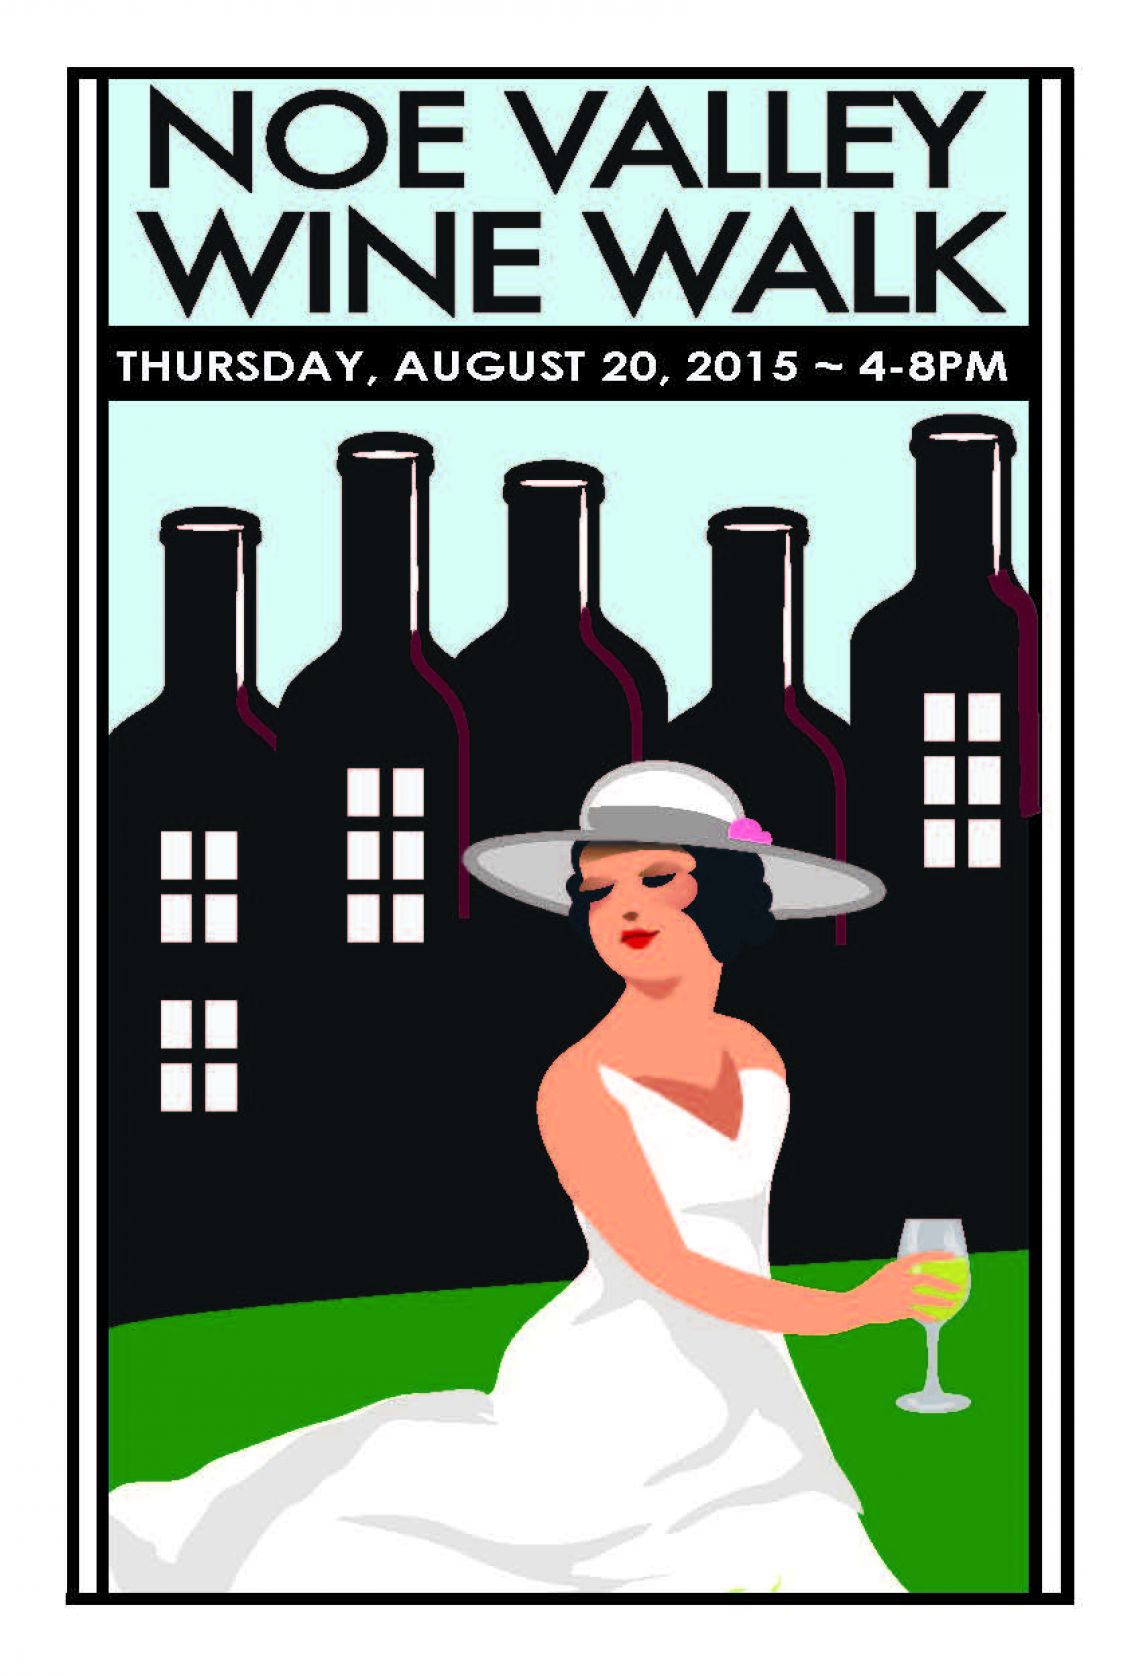 The 5th Annual Noe Valley Wine Walk